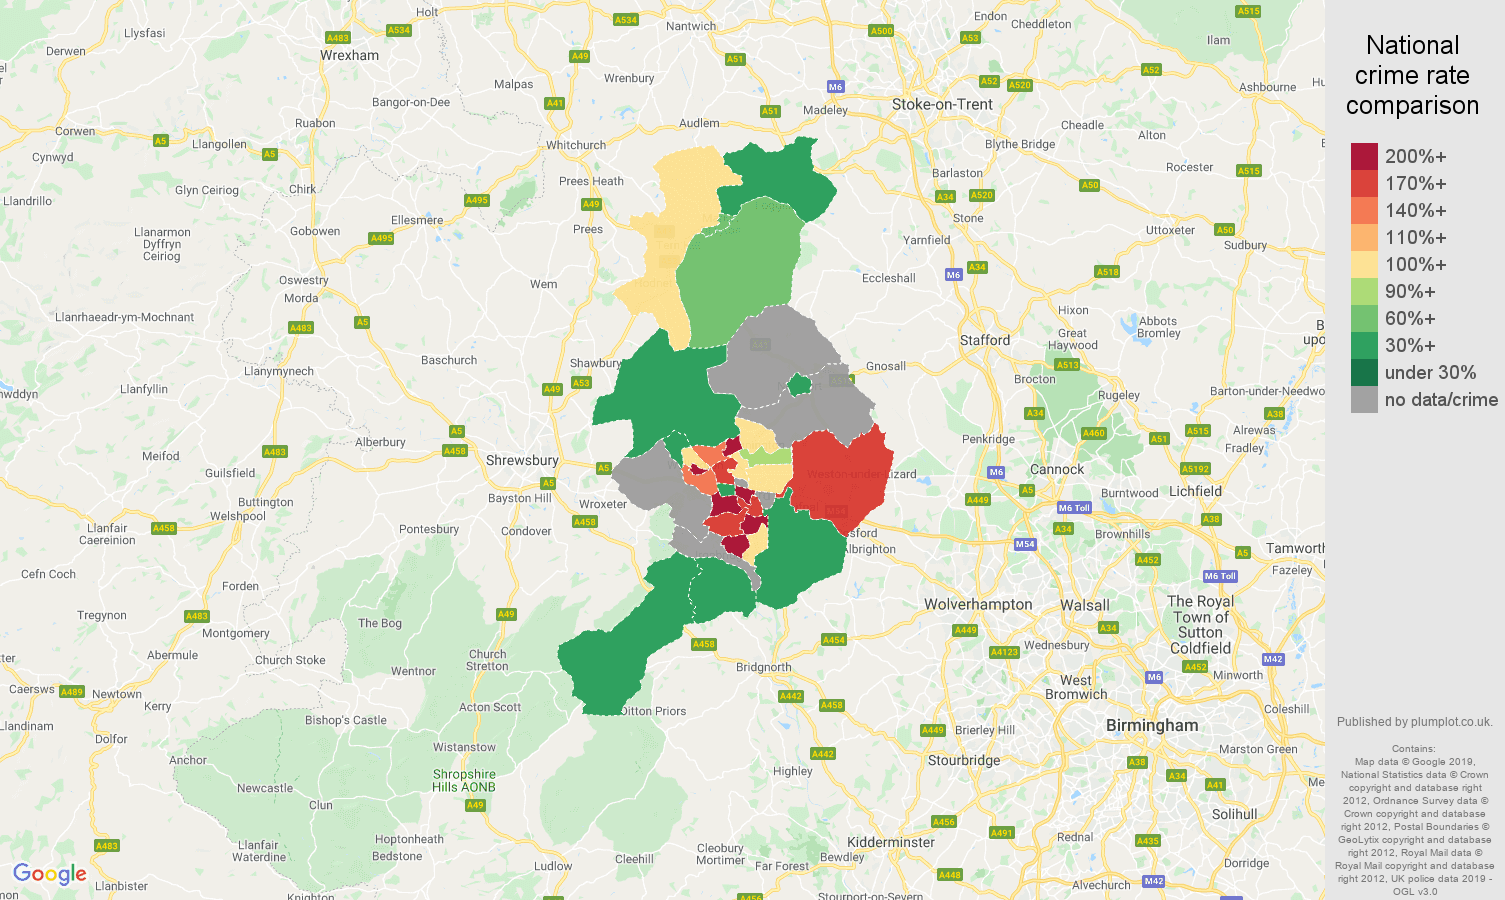 Telford possession of weapons crime rate comparison map